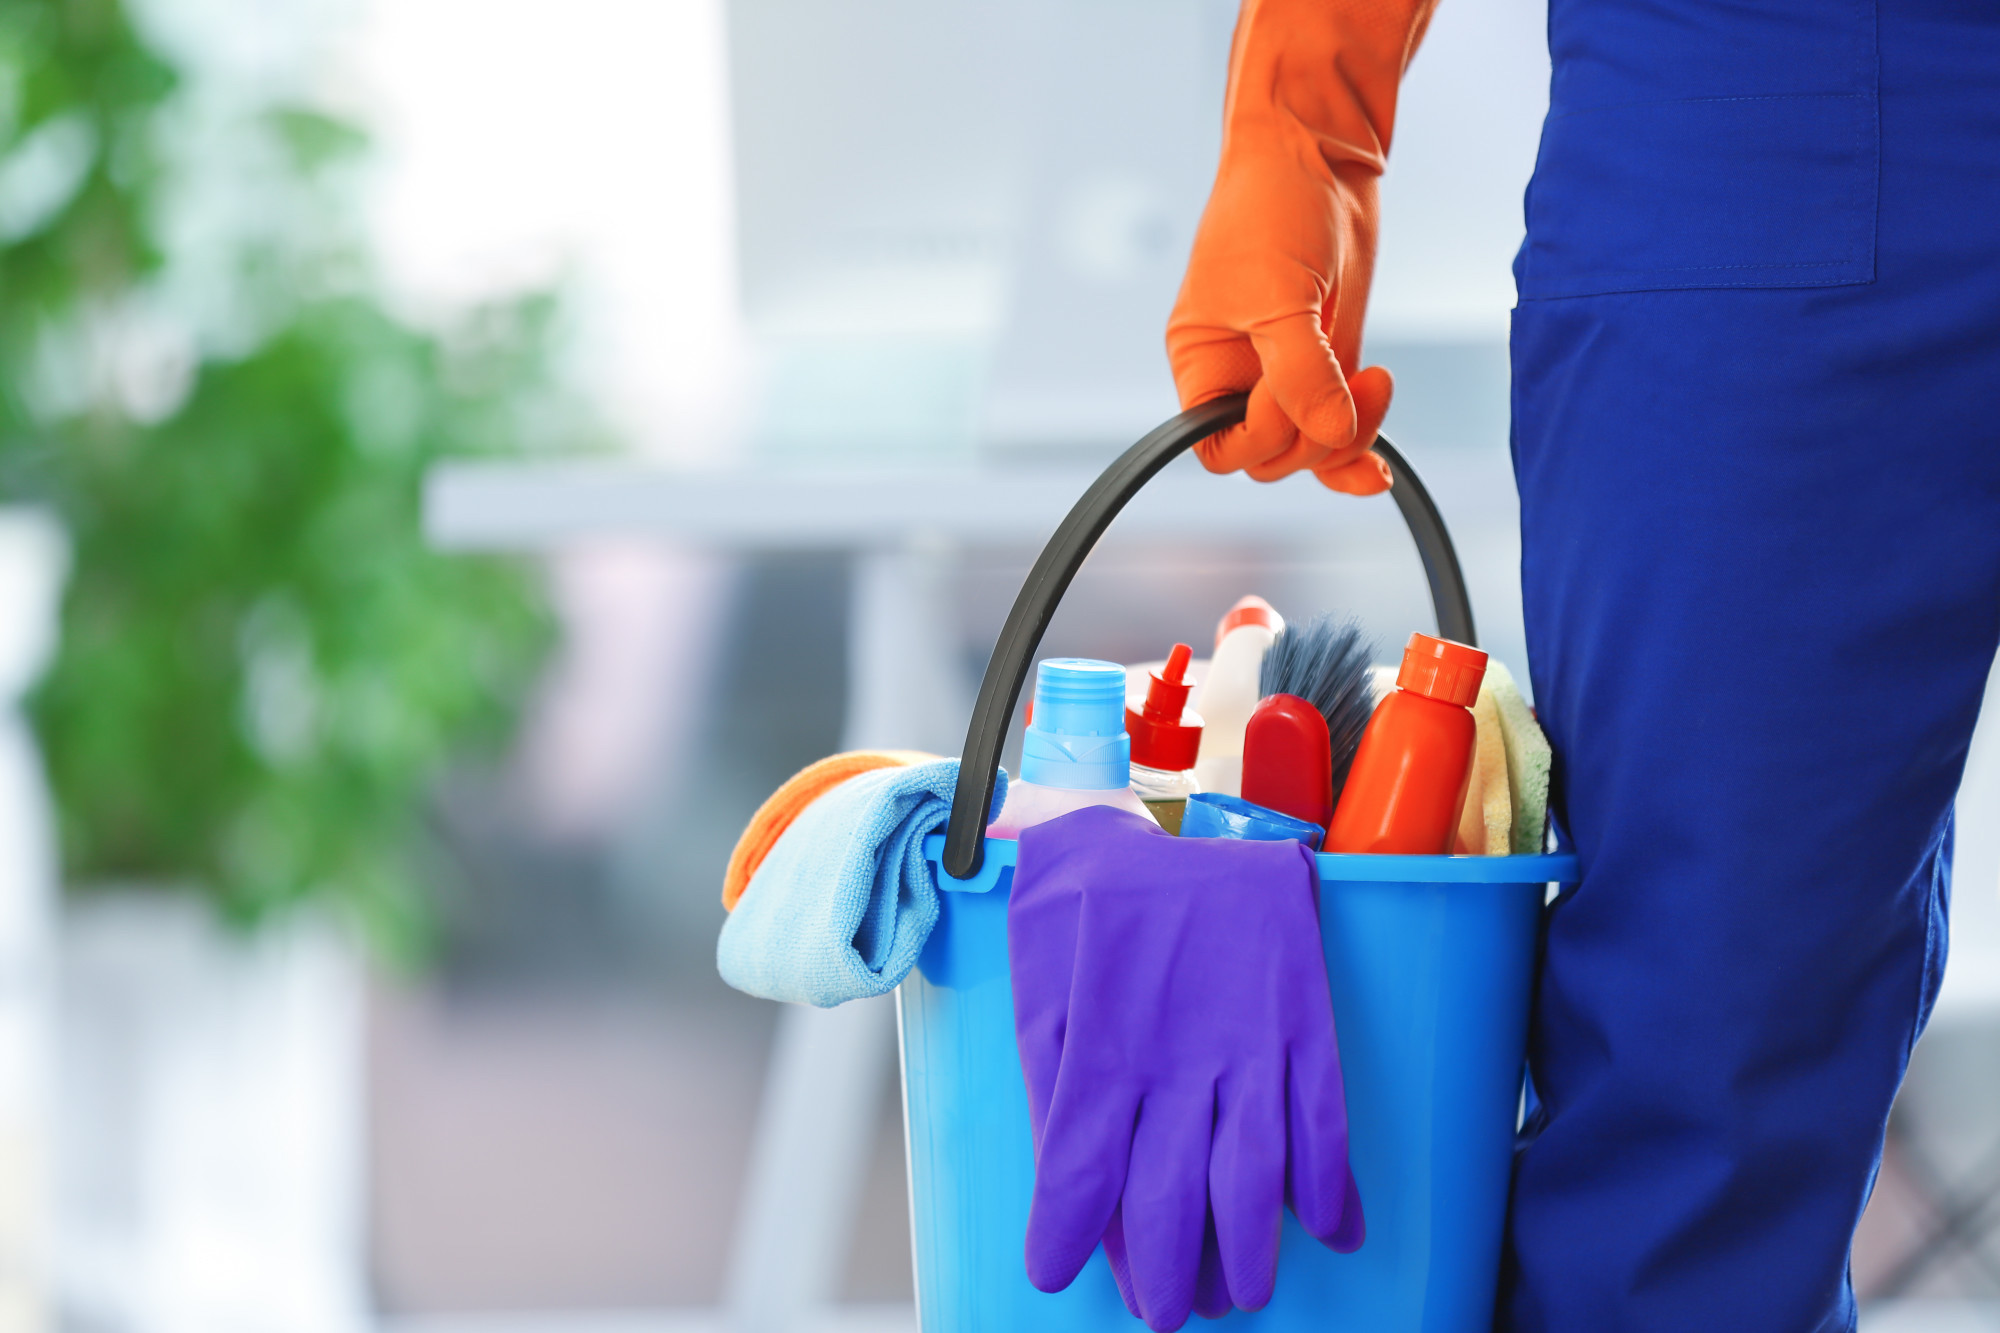 How To Find A Housekeeper